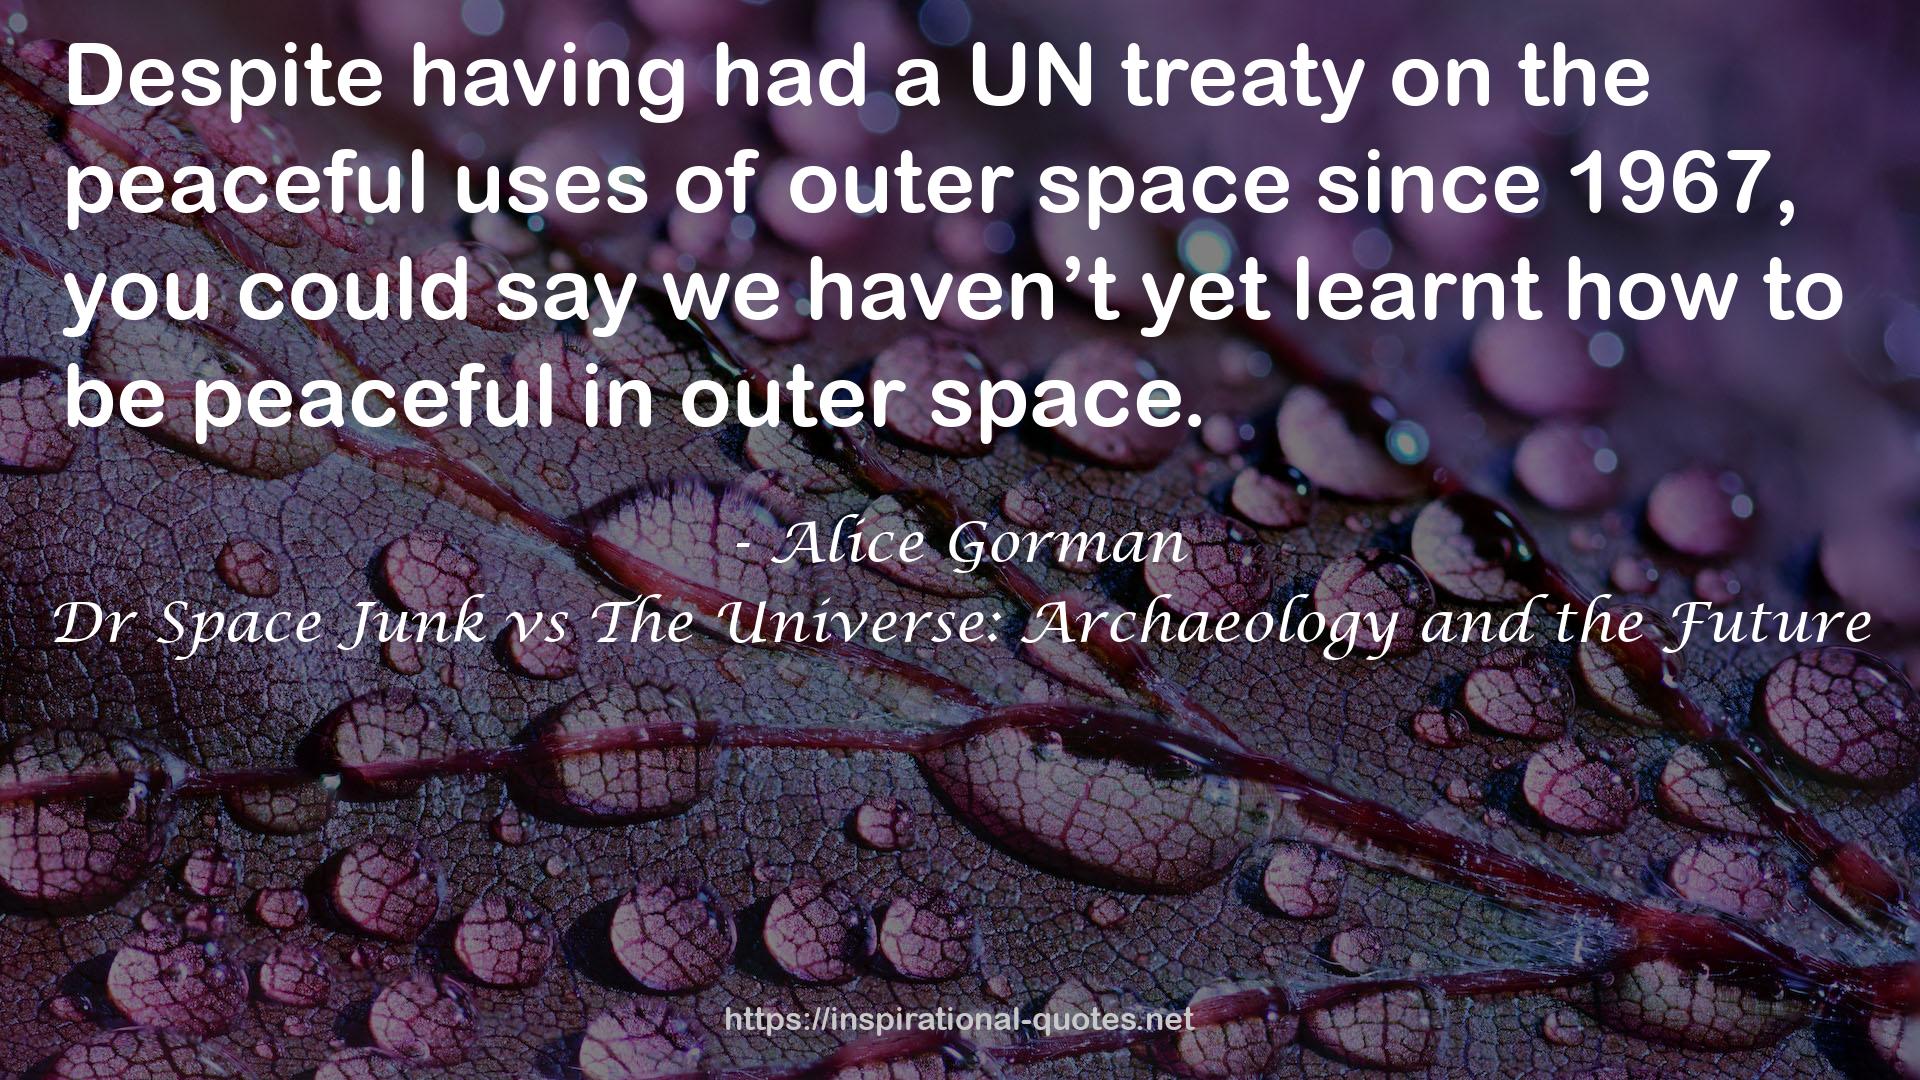 Dr Space Junk vs The Universe: Archaeology and the Future QUOTES